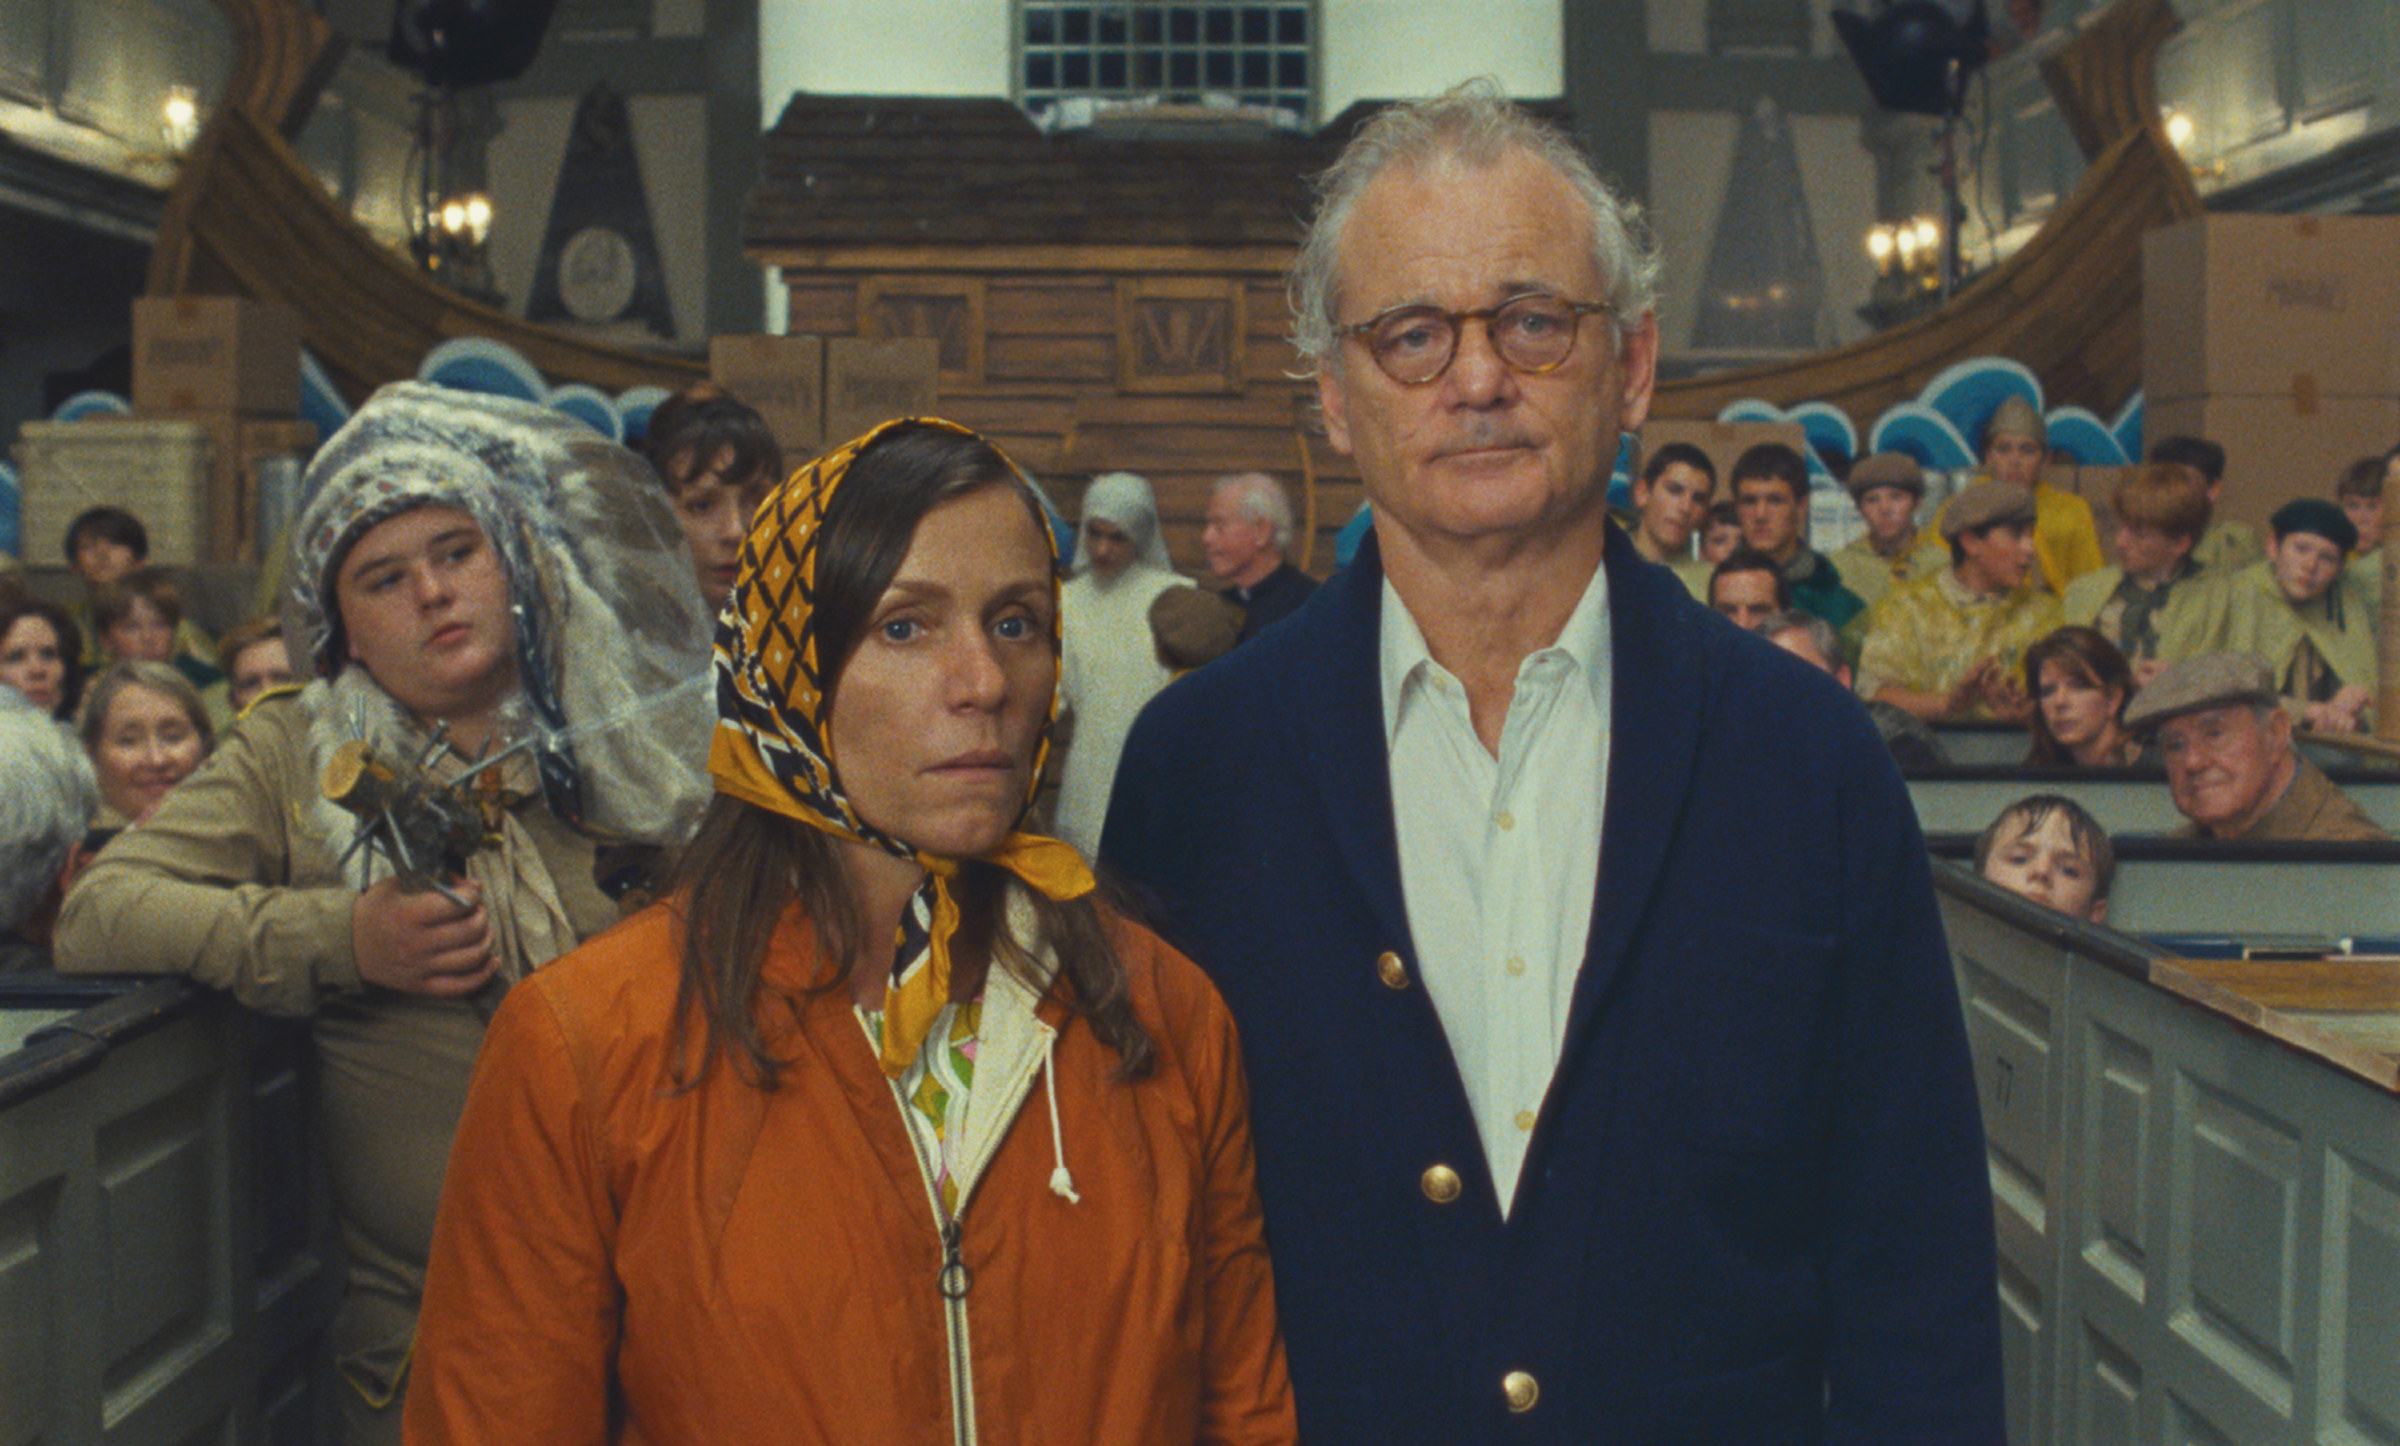 A woman, Frances McDormand, with a scarf tied around her head and a man, Bill Murray, wearing glasses and a cardigan, looking unimpressed